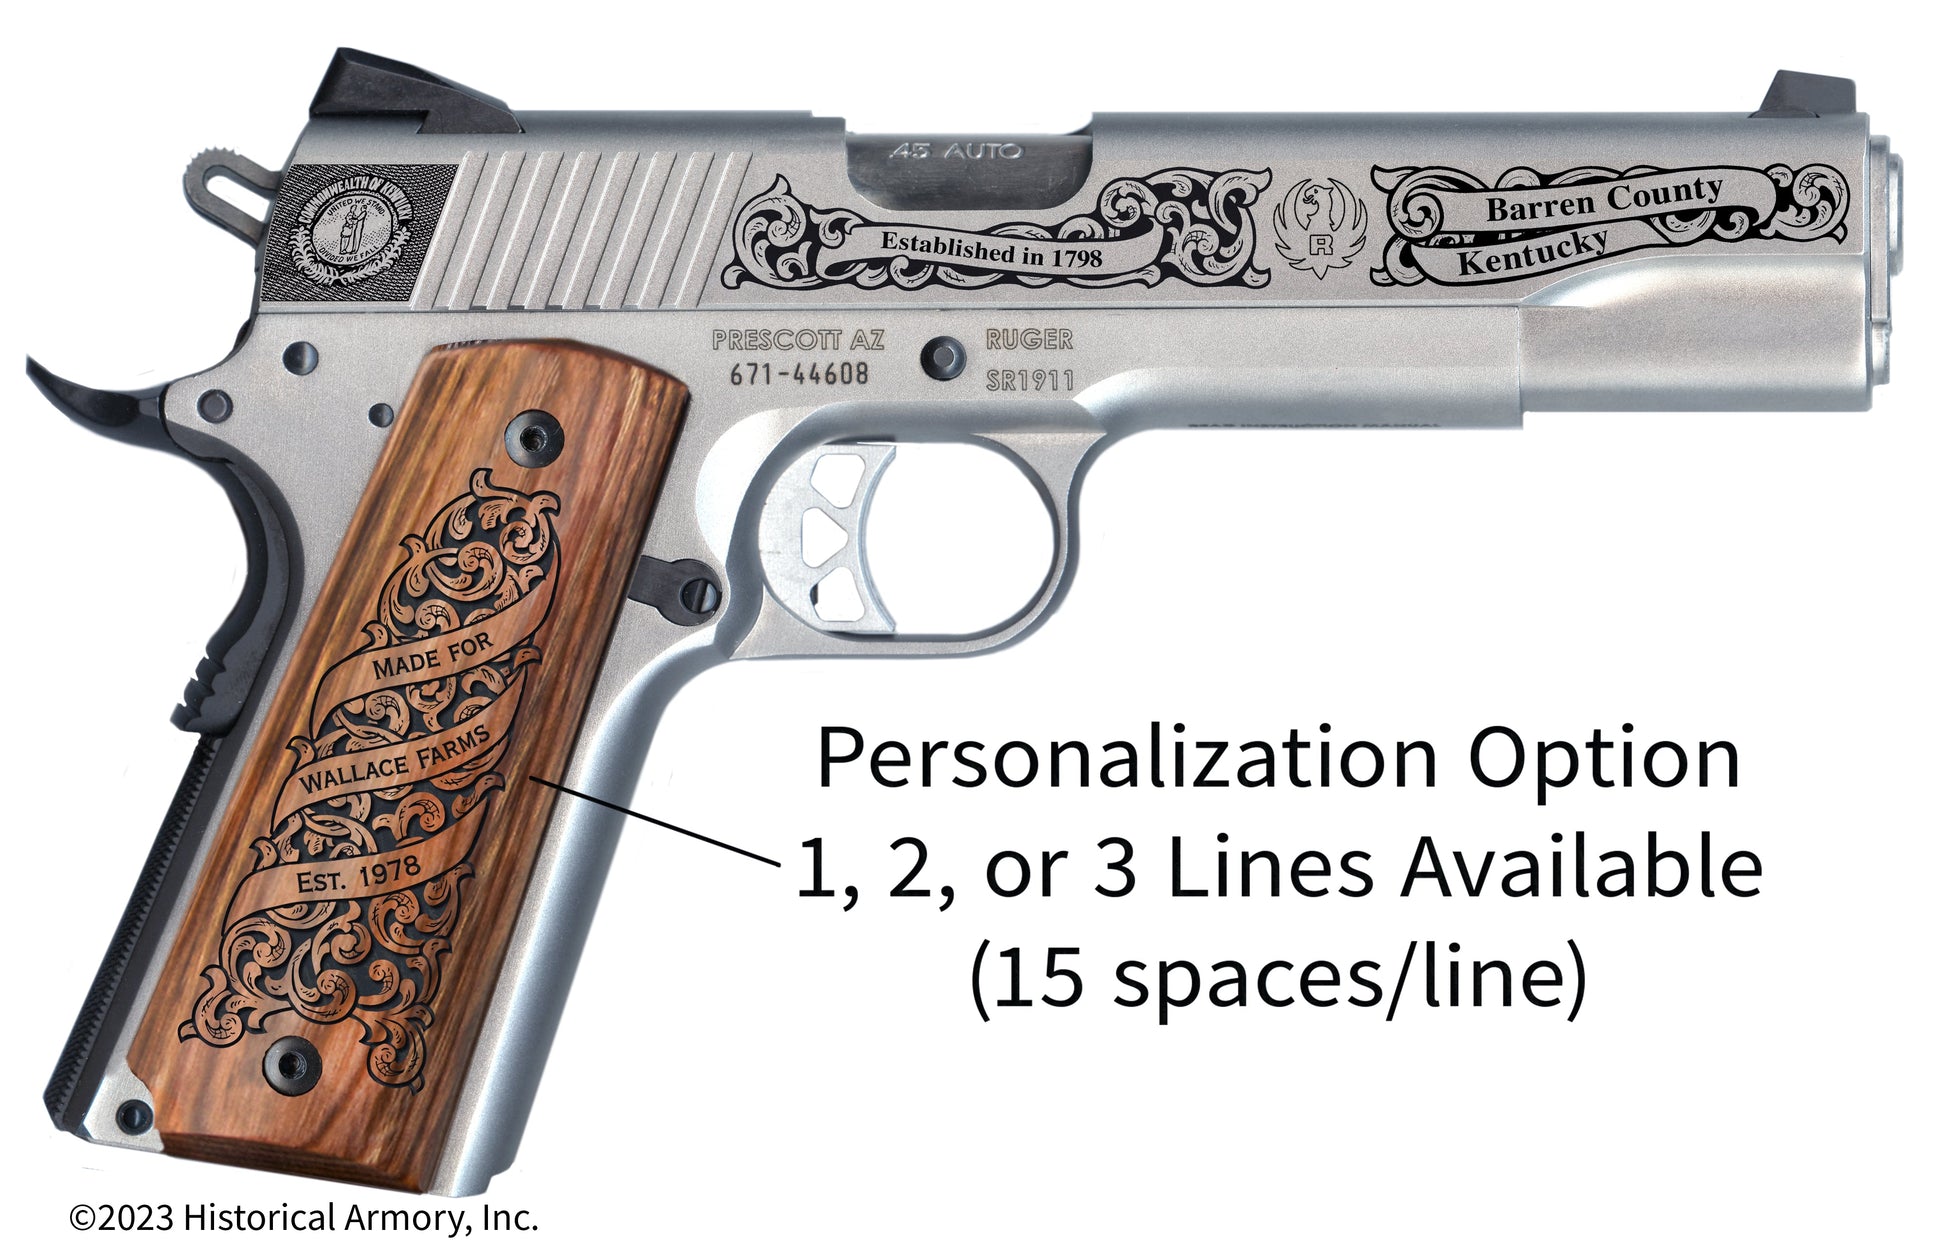 Barren County Kentucky Personalized Engraved .45 Auto Ruger 1911